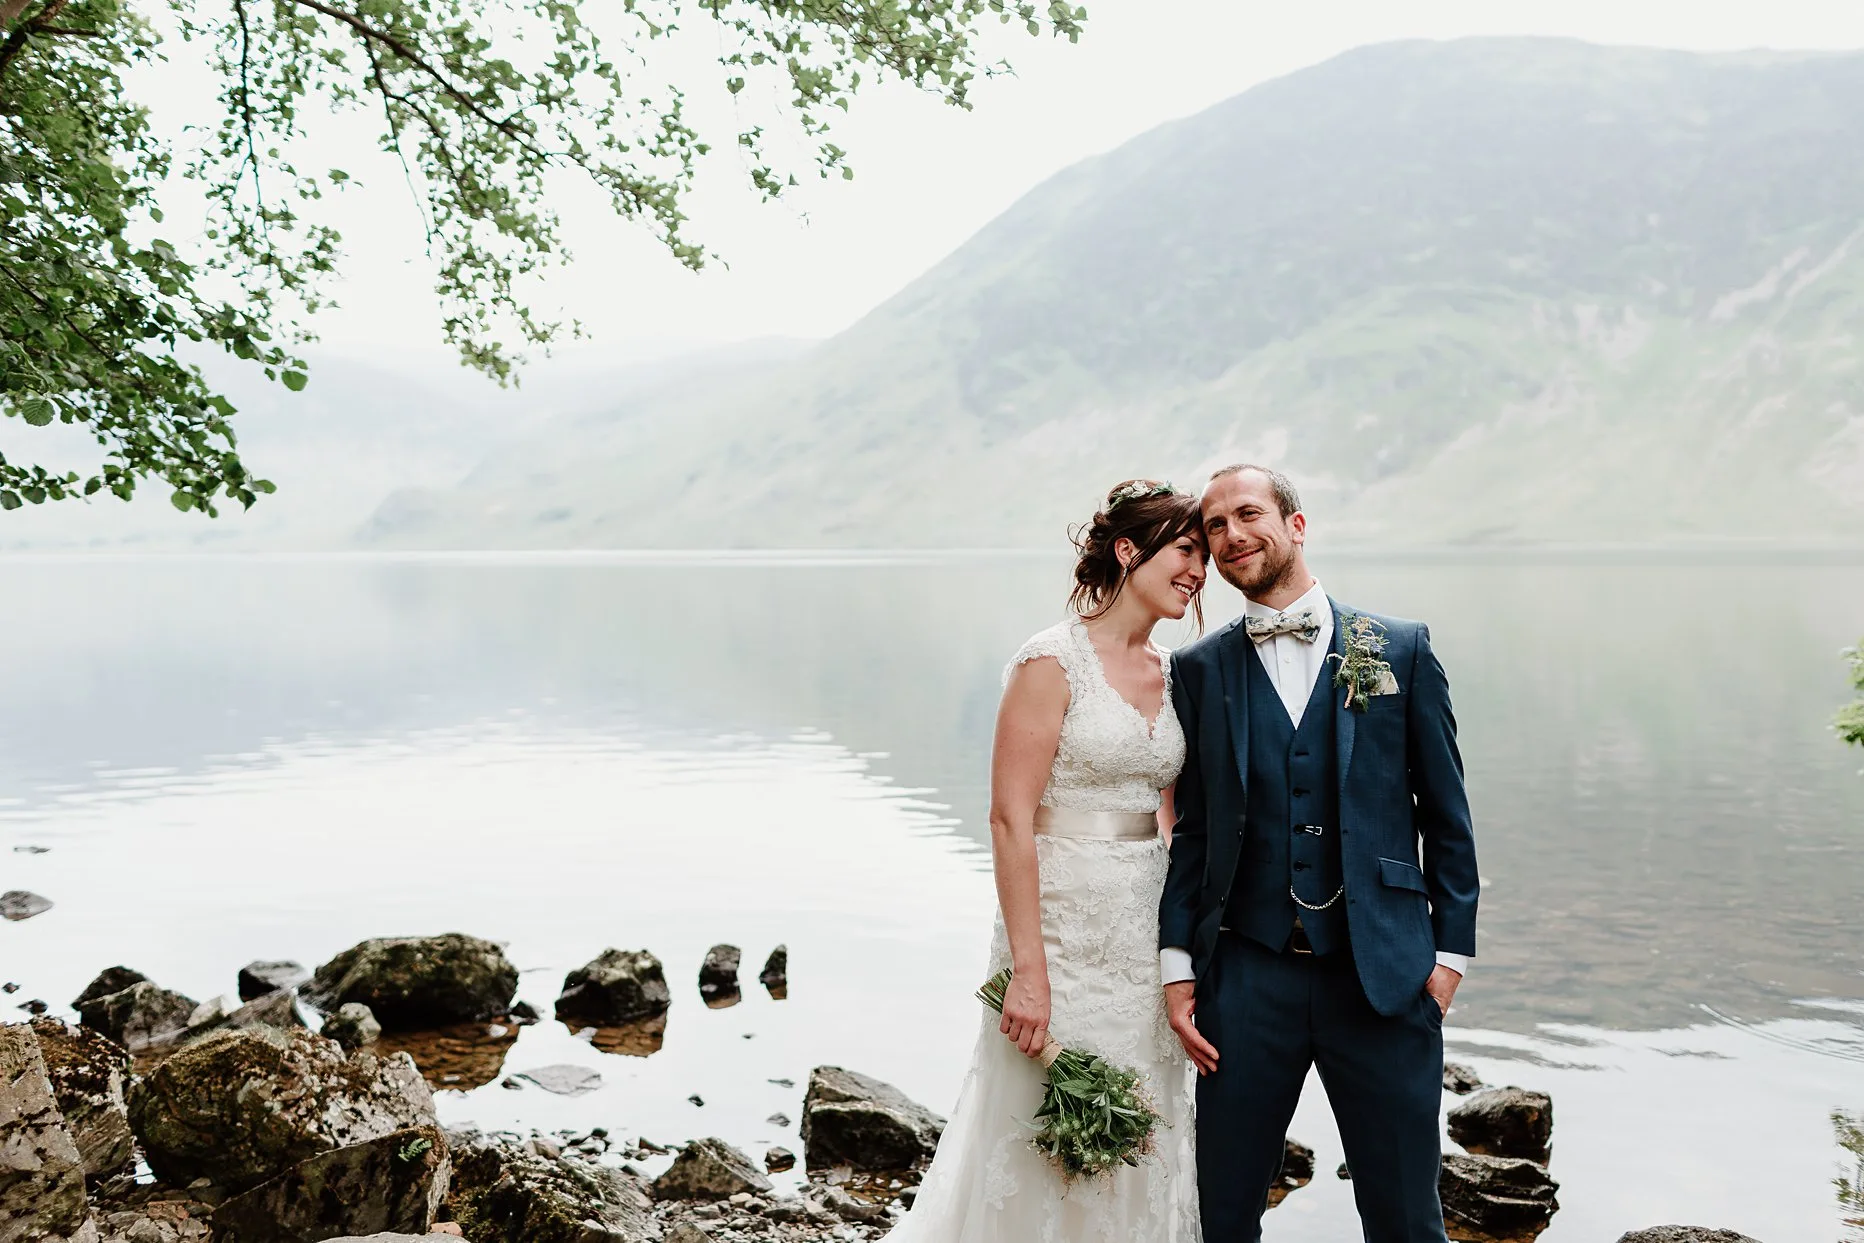 Bride resting head on grooms temple. Groom has his hand in his pocket and both are smiling. Crummock water in the background.